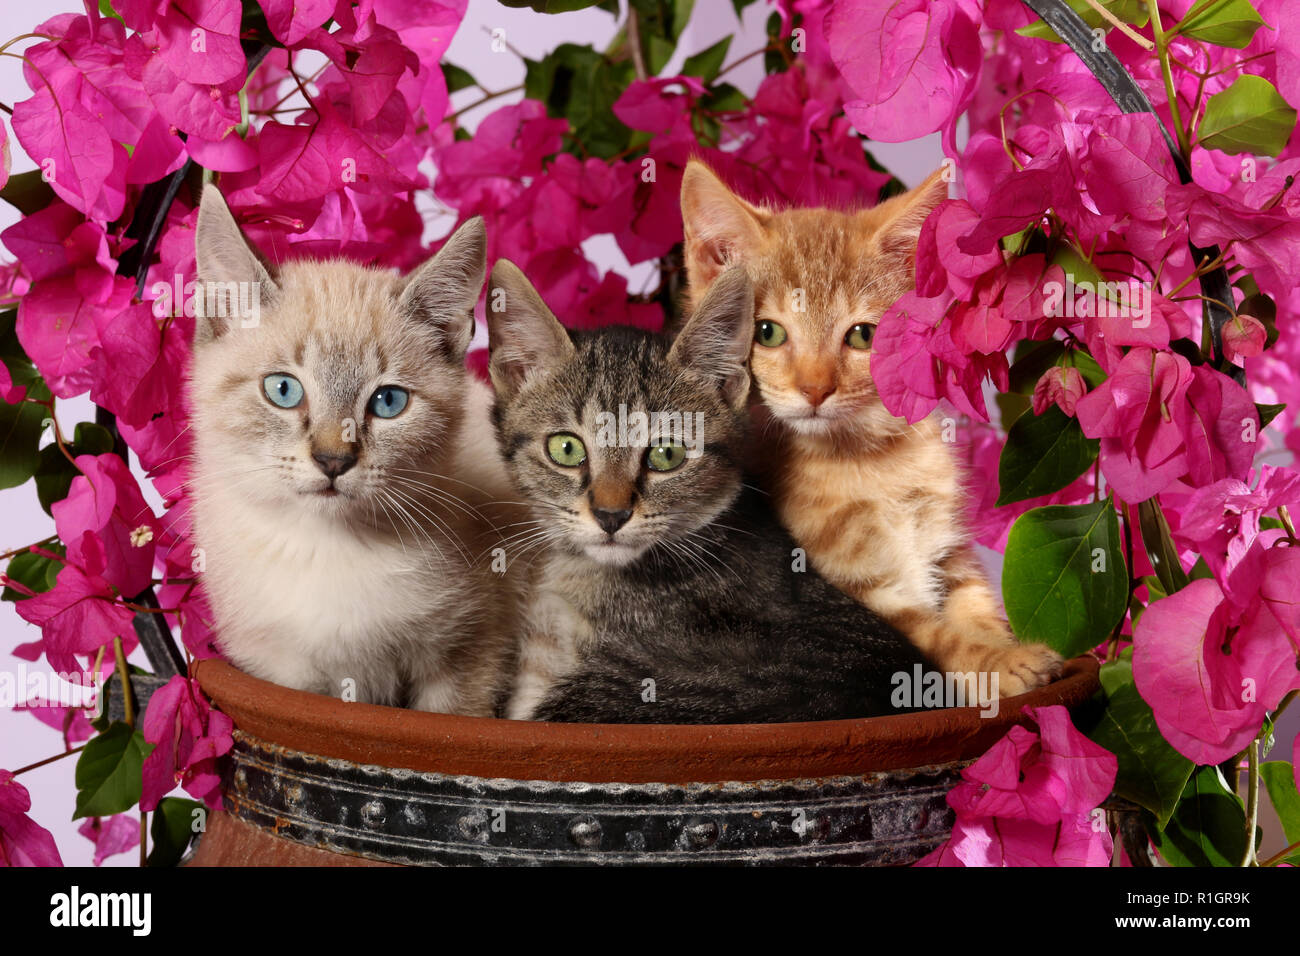 3 kittens, 3 month old, seal tabby point, black tabby and red tabby, sitting in a flower pot with flowering bougainvillea Stock Photo